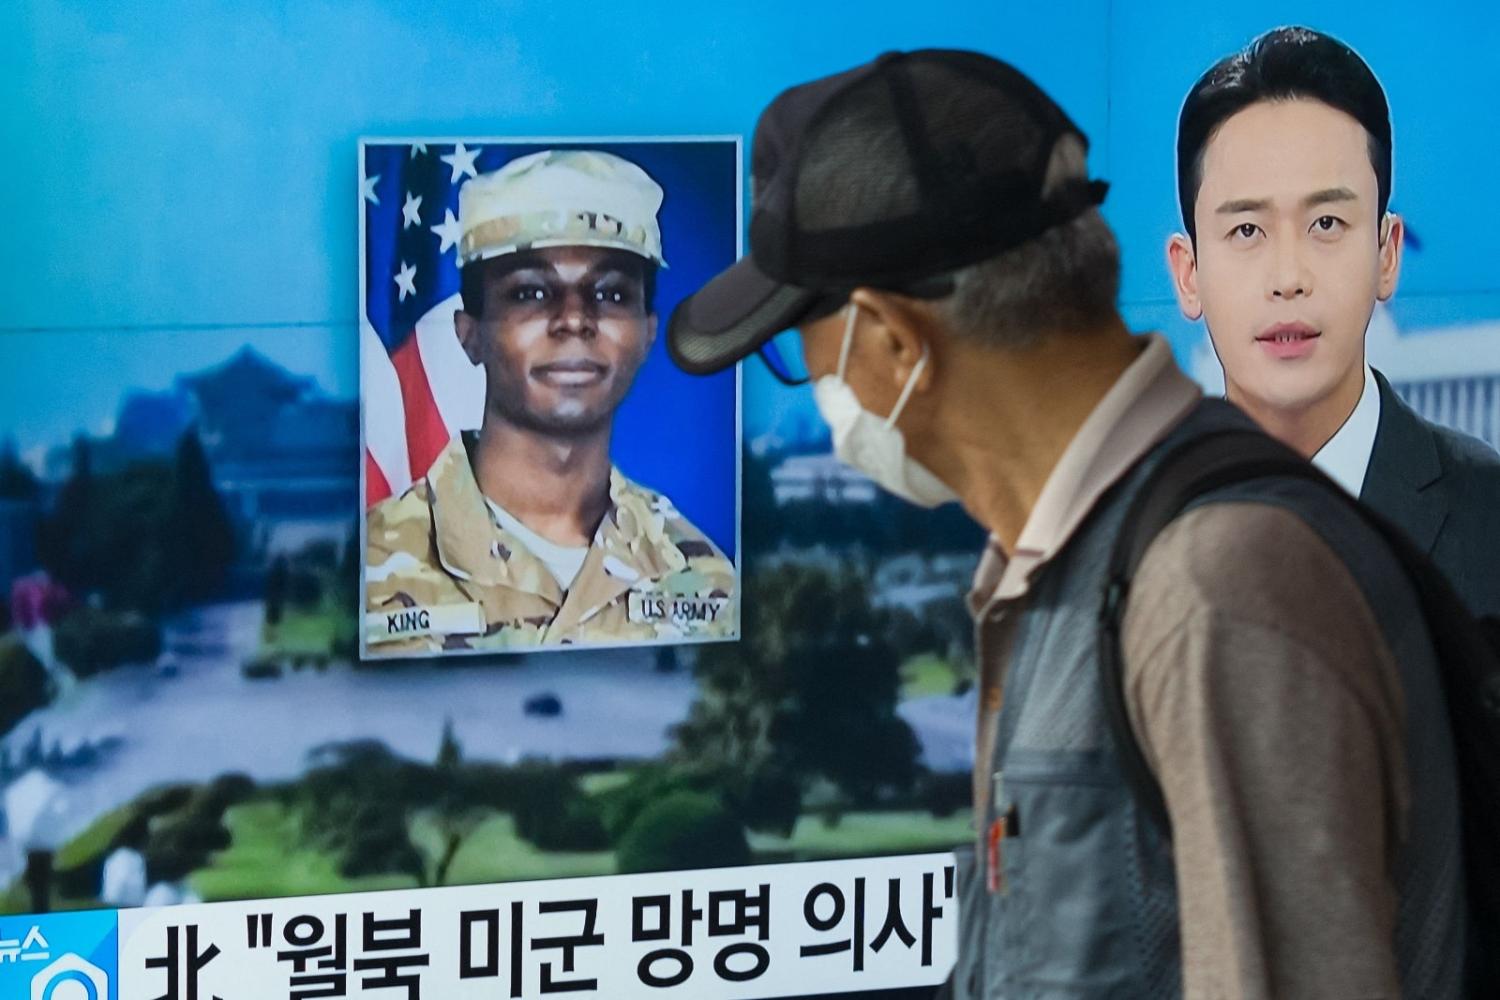 A news broadcast in Seoul on 16 August features US soldier Travis King, who ran across the border into North Korea while part of a DMZ tour group (Anthony Wallace/Getty Images)